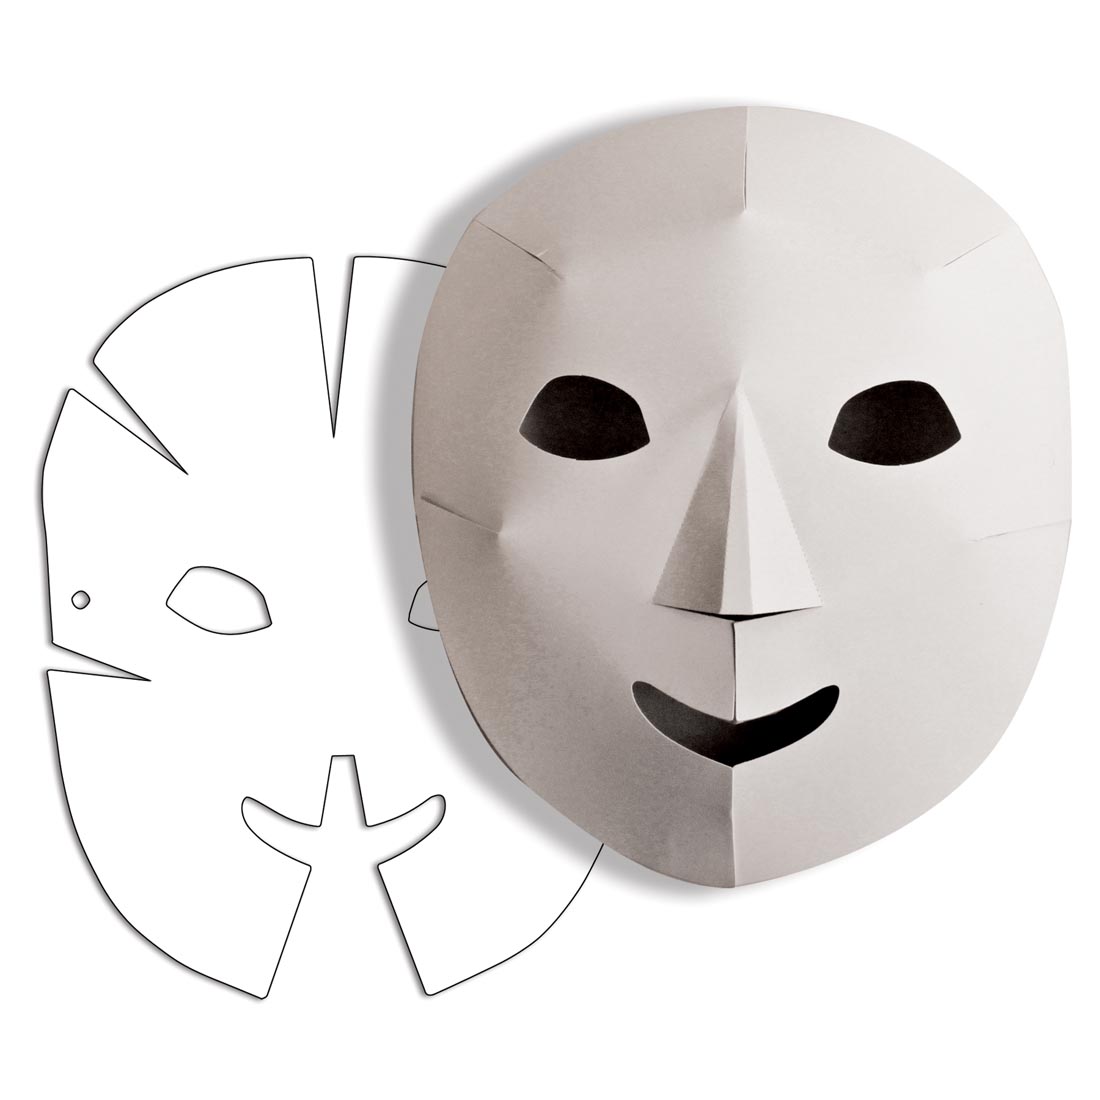 Creativity Street Dimensional Paper Mask, shown both flat and folded